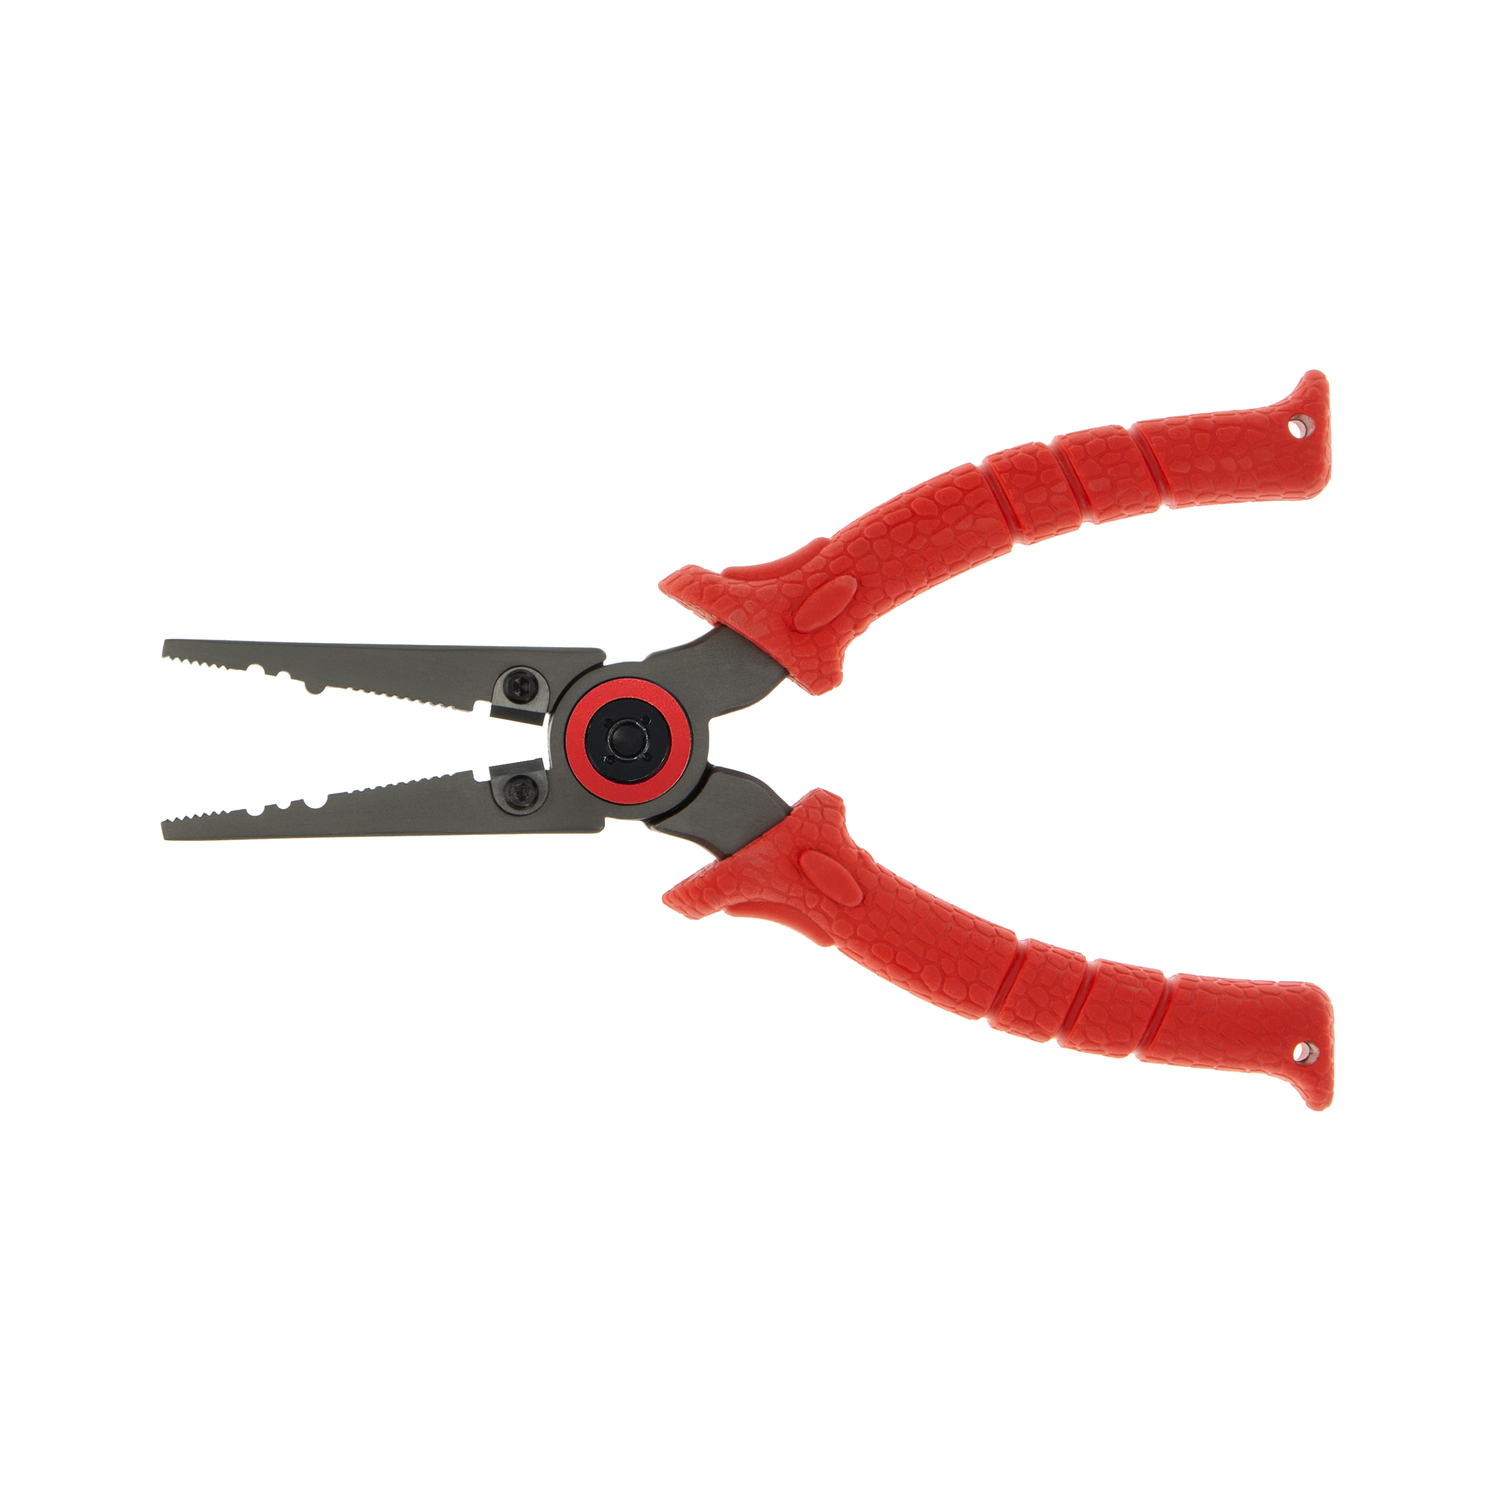 Bubba Fishing and Angling Pliers 6.5 in. - Ace Hardware